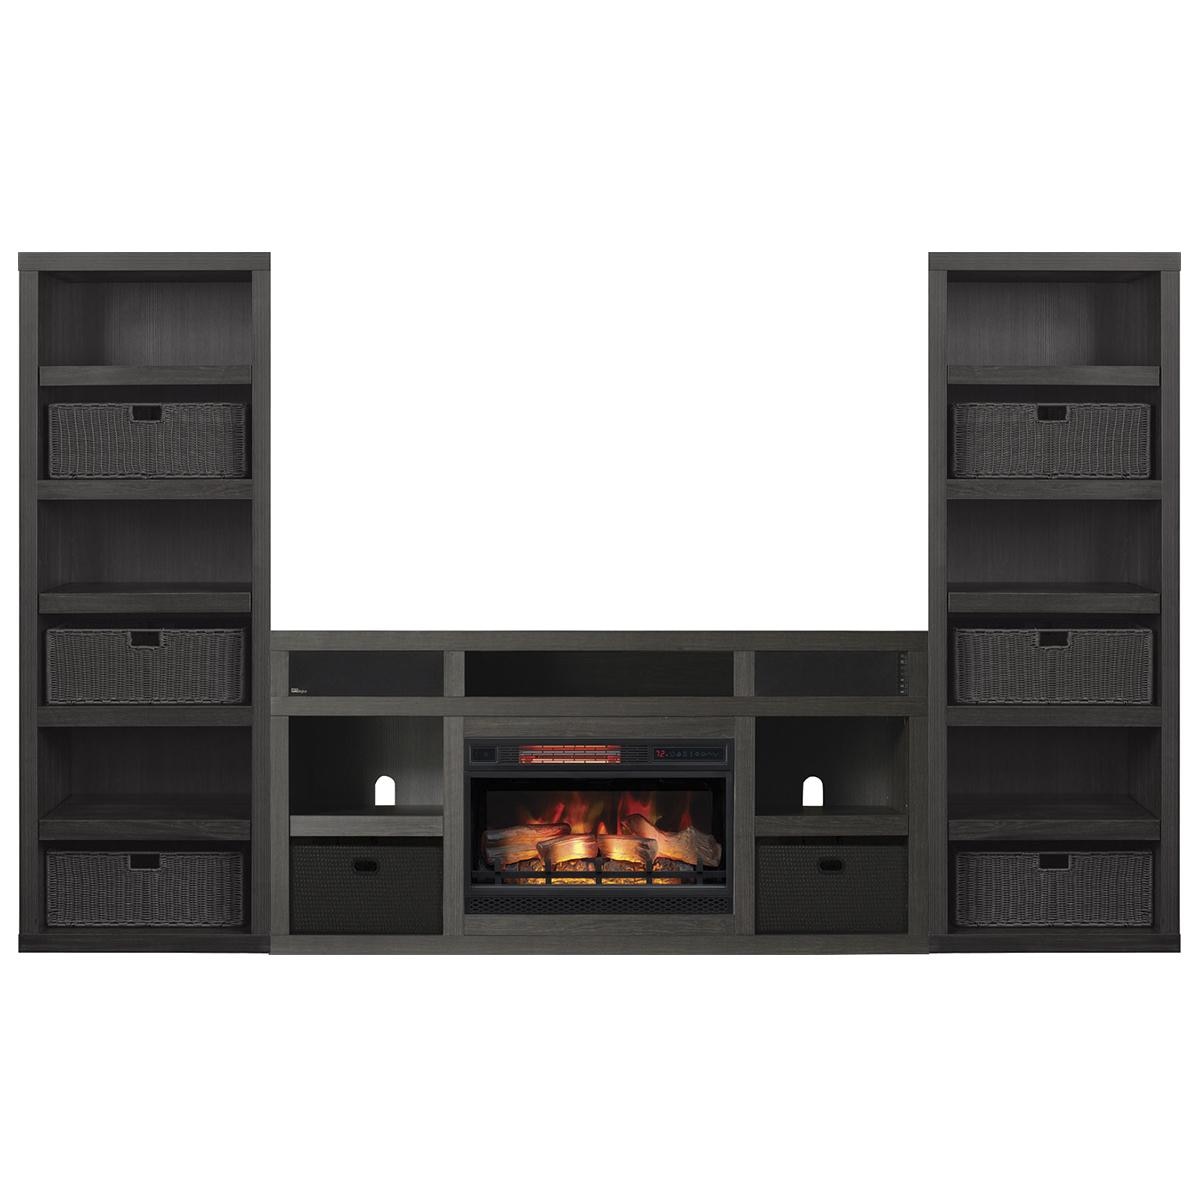 Tv and Fireplace Wall Fresh Fabio Flames Greatlin 3 Piece Fireplace Entertainment Wall